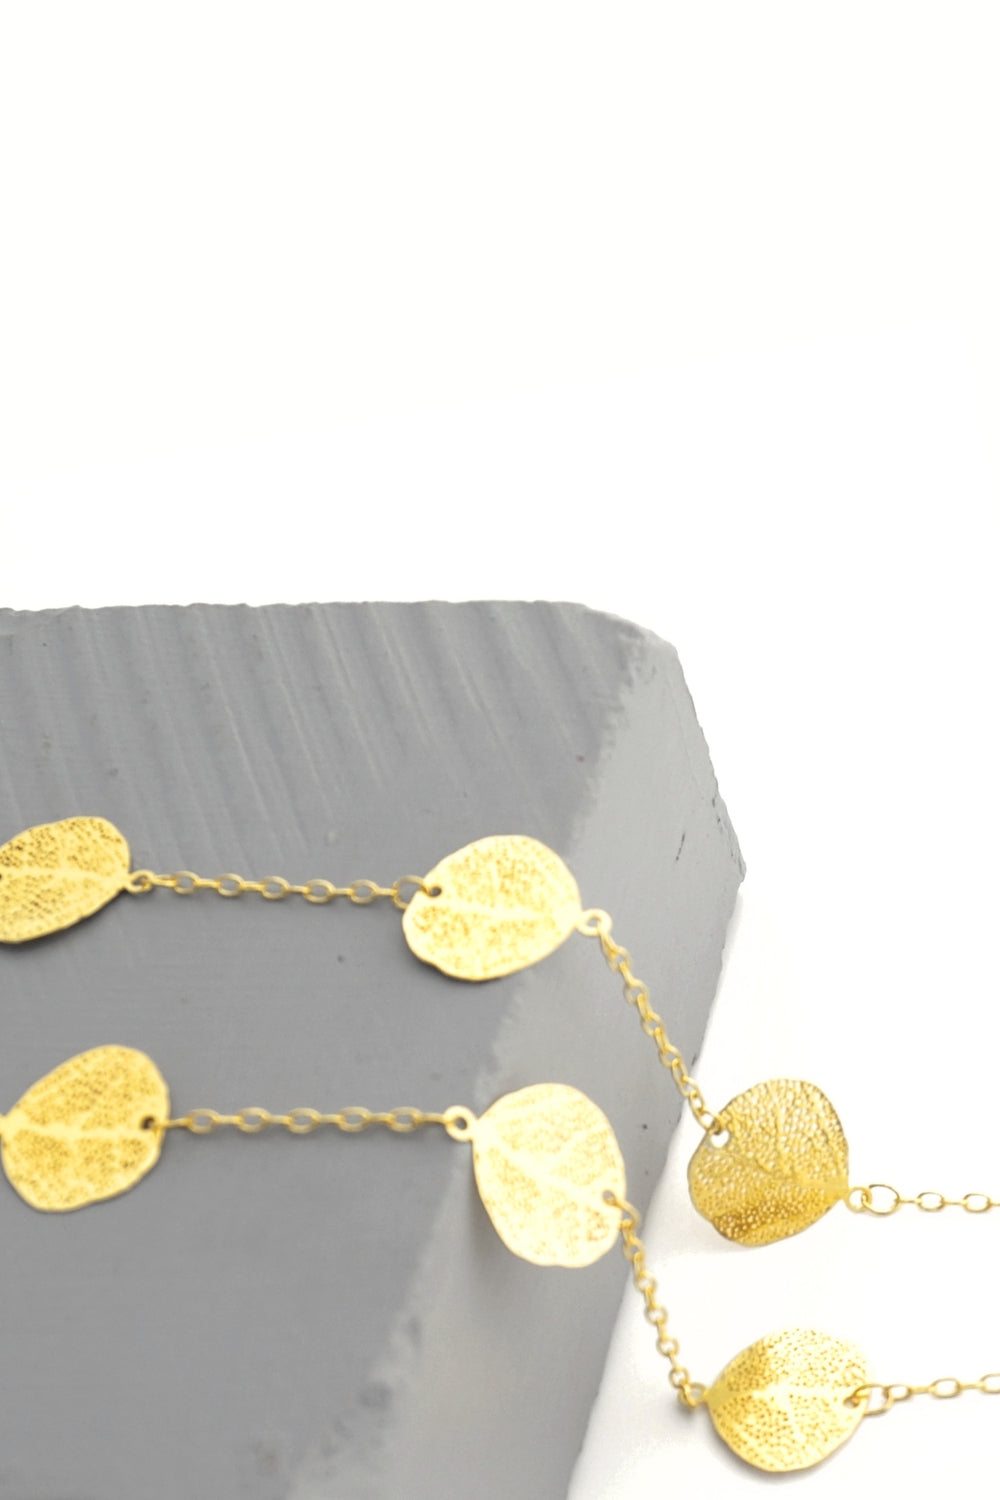 LEAFLY - Fine GOLD Eyewear Chain and Necklace | SPECSET